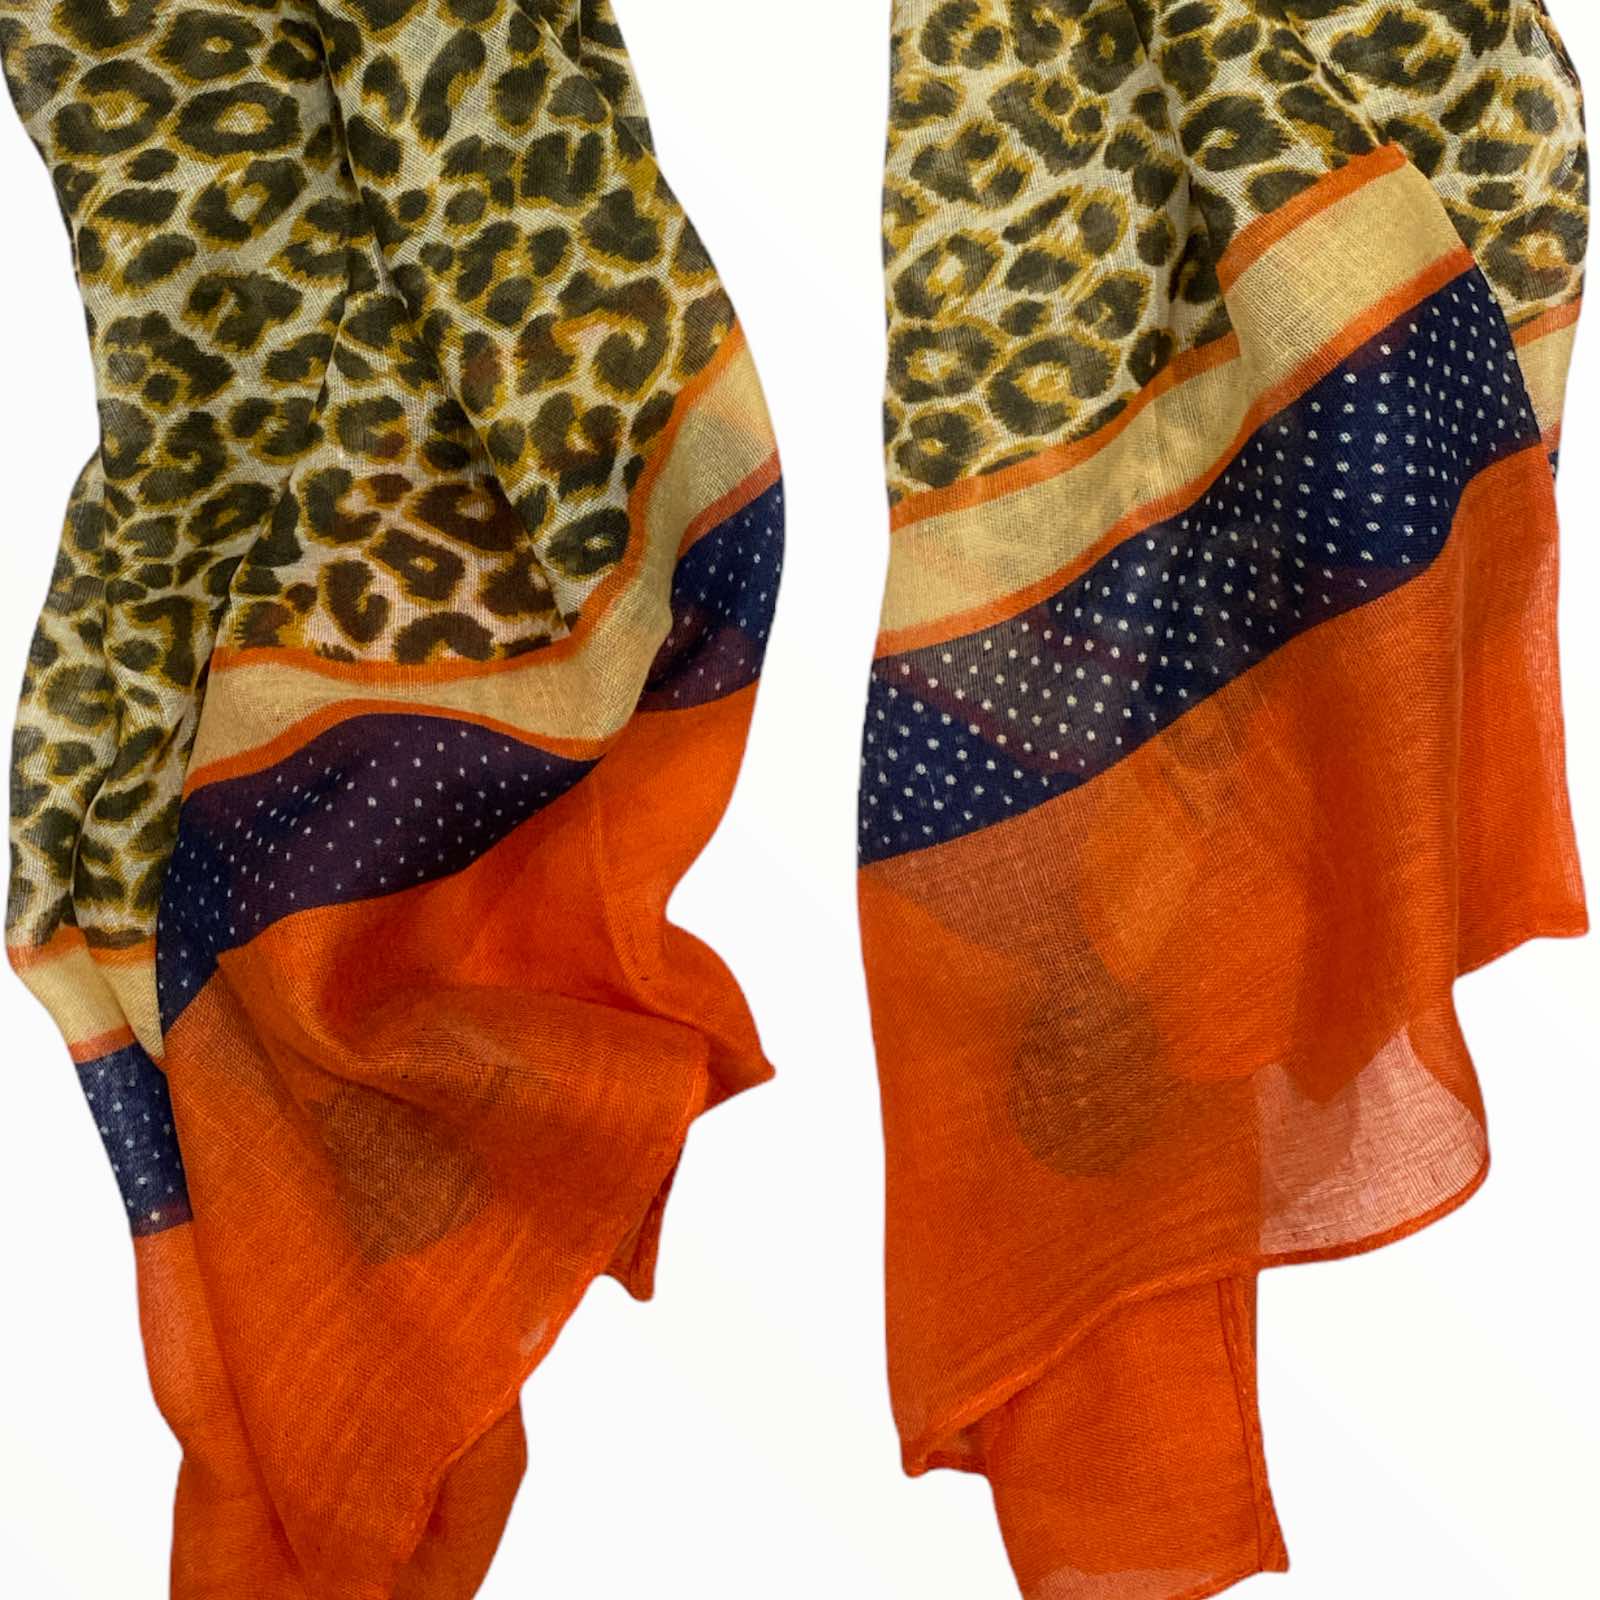 Yellow leopard-print scarf with aperol details